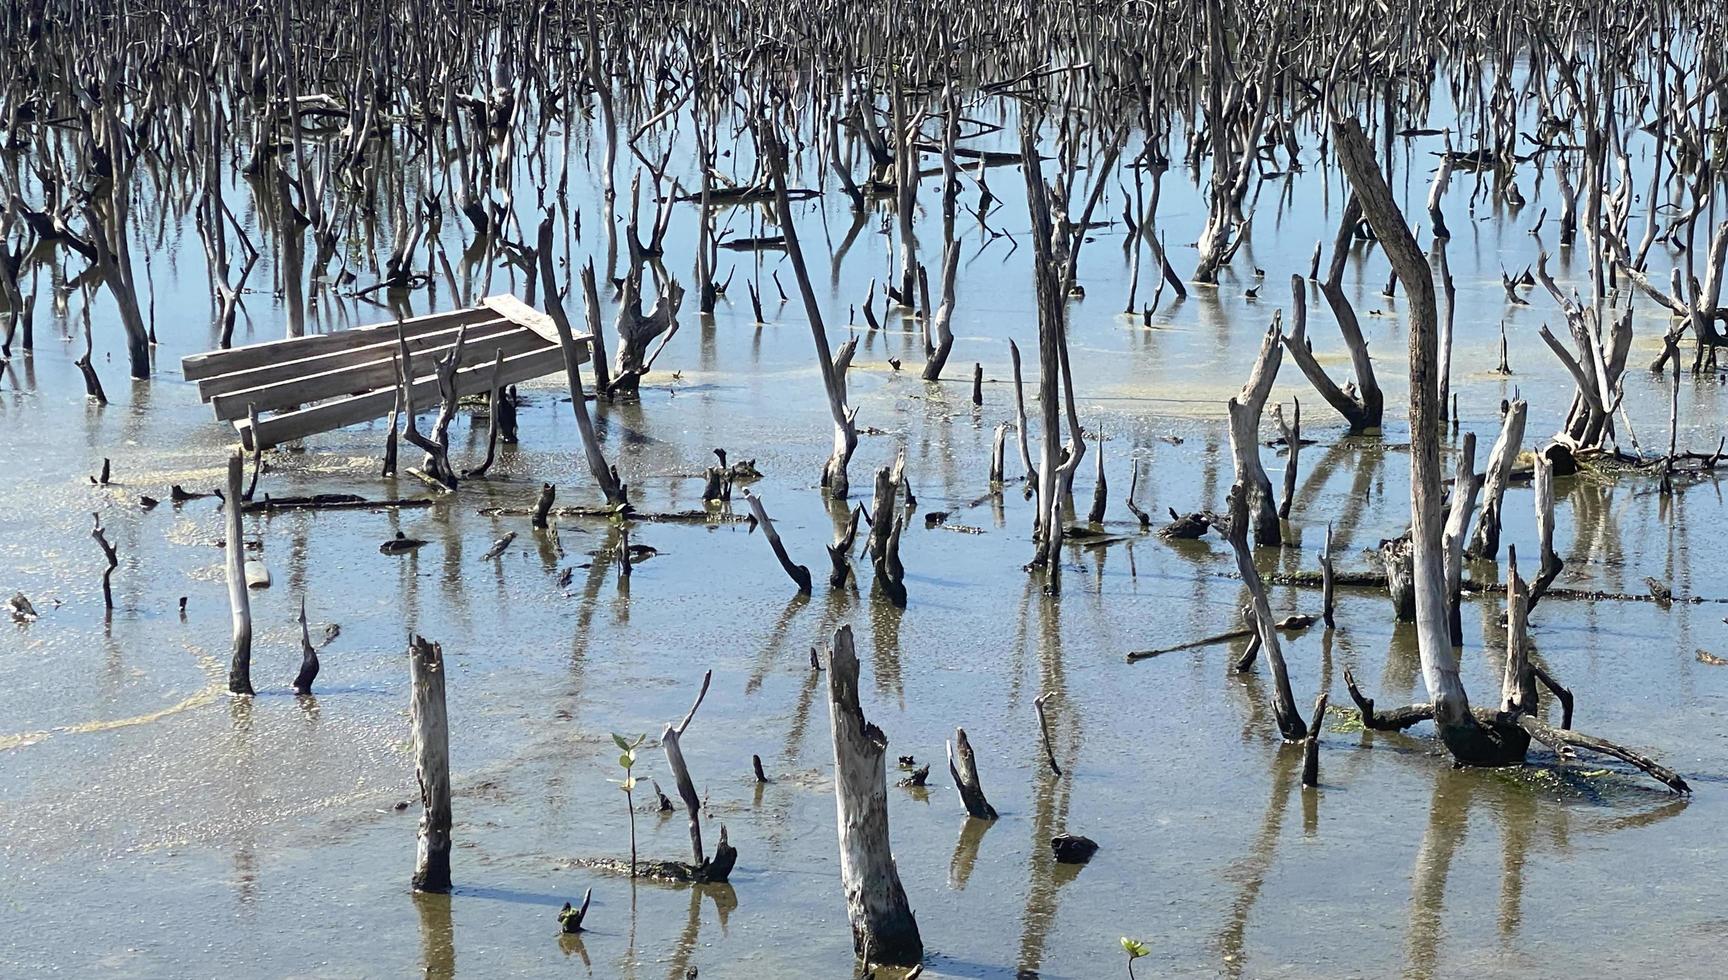 destroyed mangrove forest scenery, destroyed mangrove forest is an ecosystem that has been severely degraded or eliminated such to urbanization, and pollution. Help take care of the mangrove forest. photo